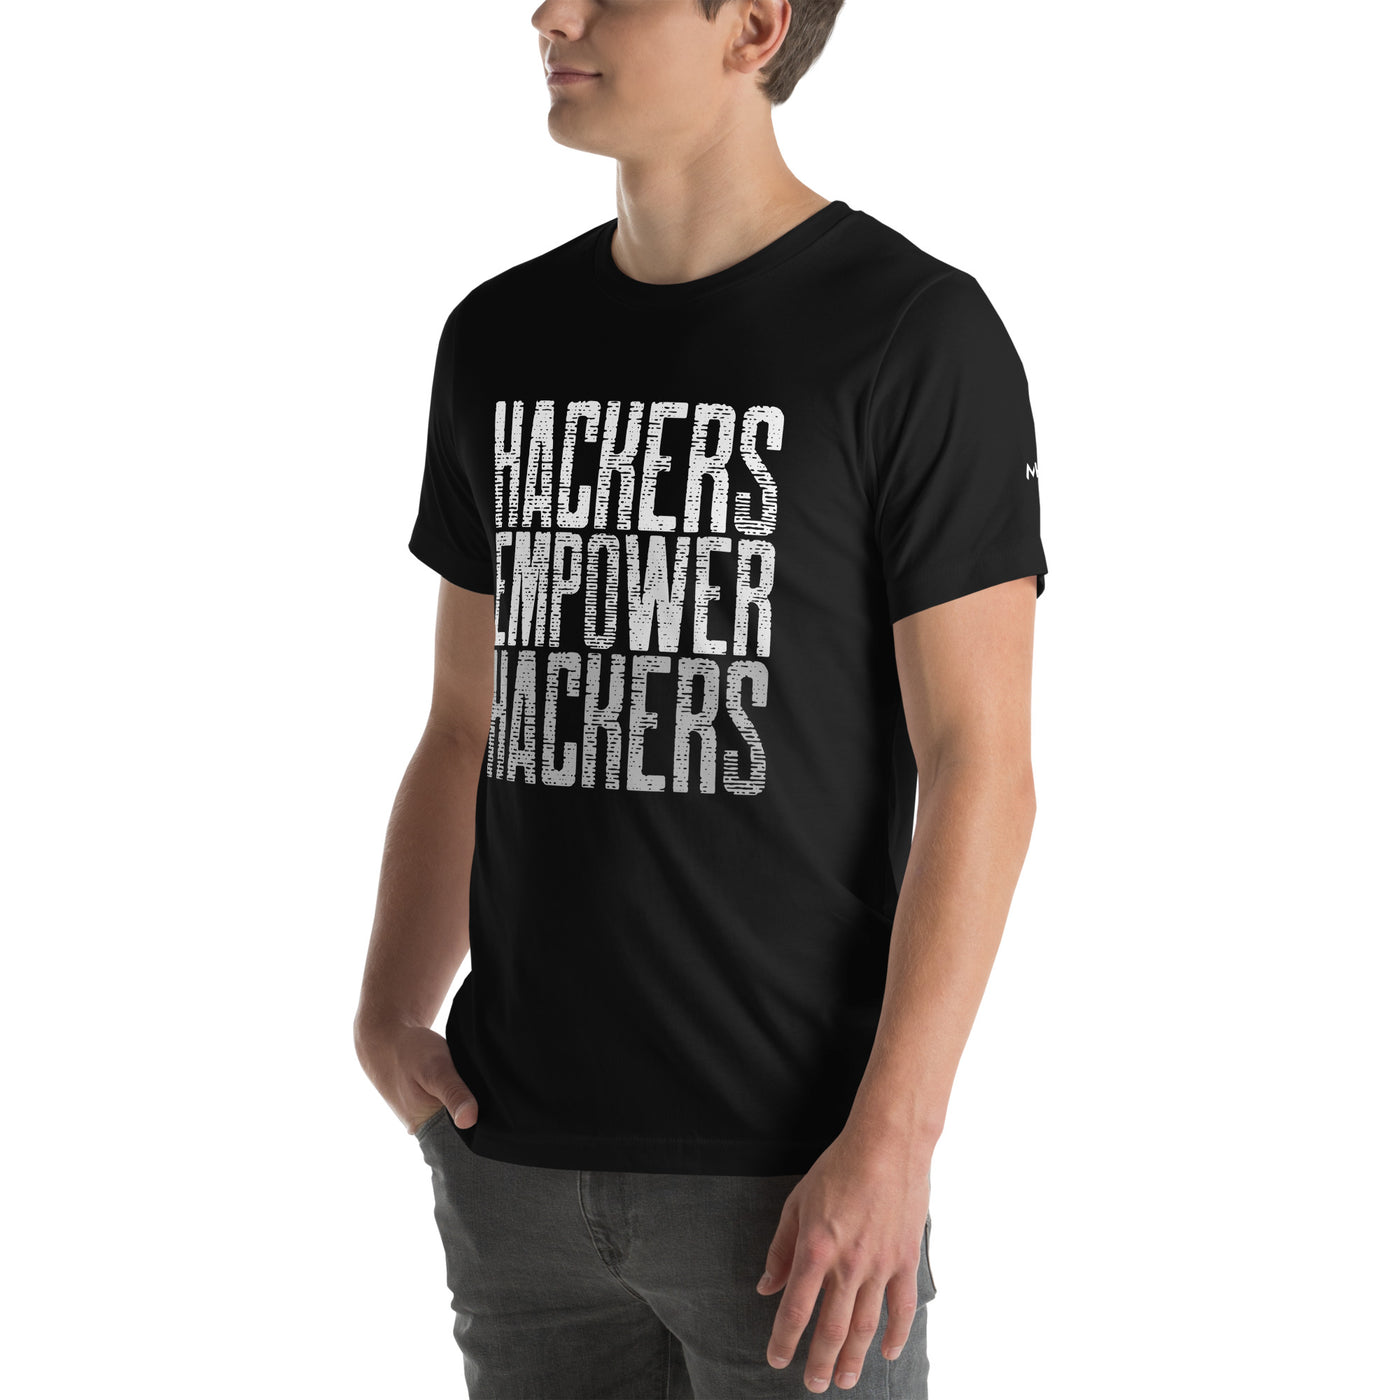 Hackers Empower Hackers V1 - Unisex t-shirt